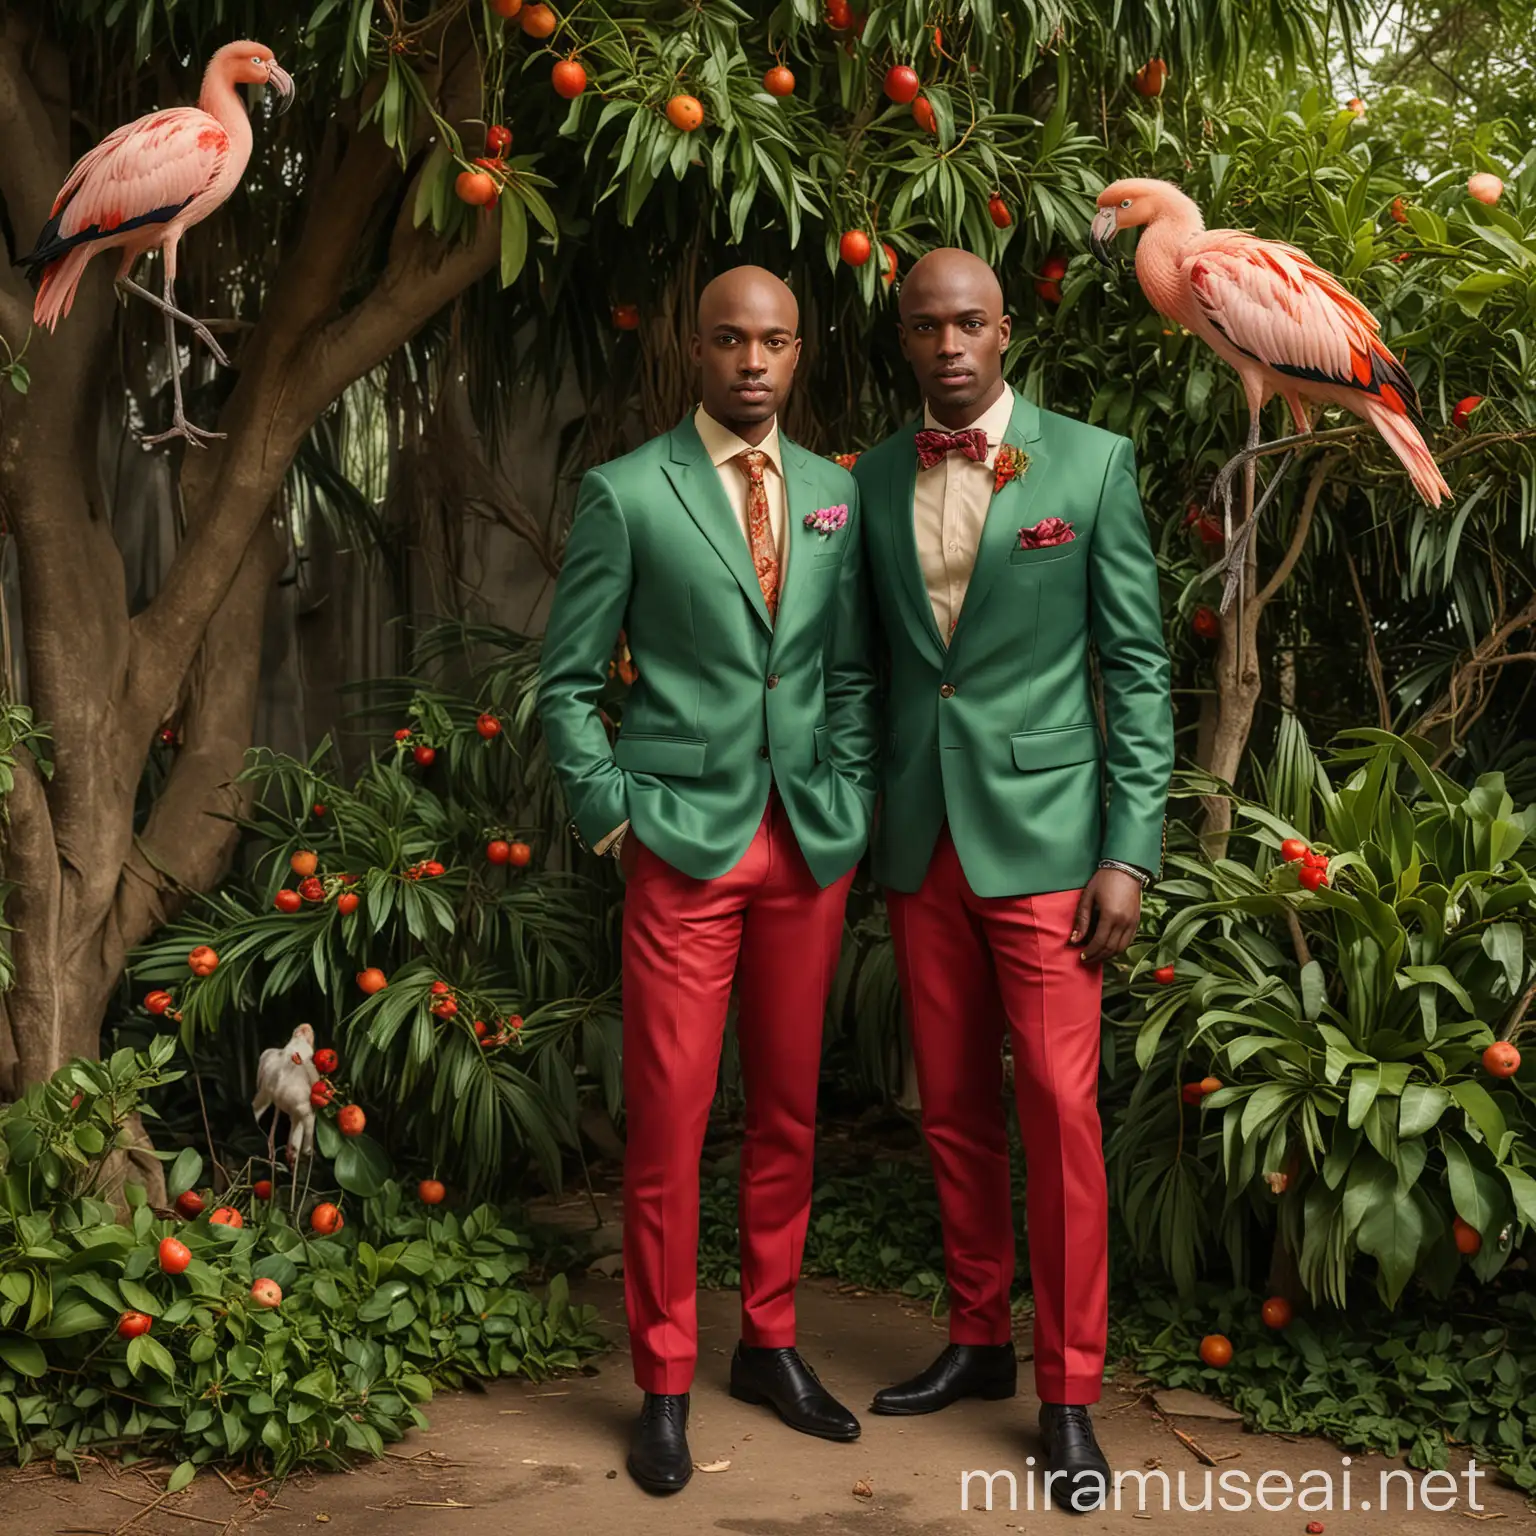 Black Men in Fashionable Attire Surrounded by Wildlife in Studio Ambiance